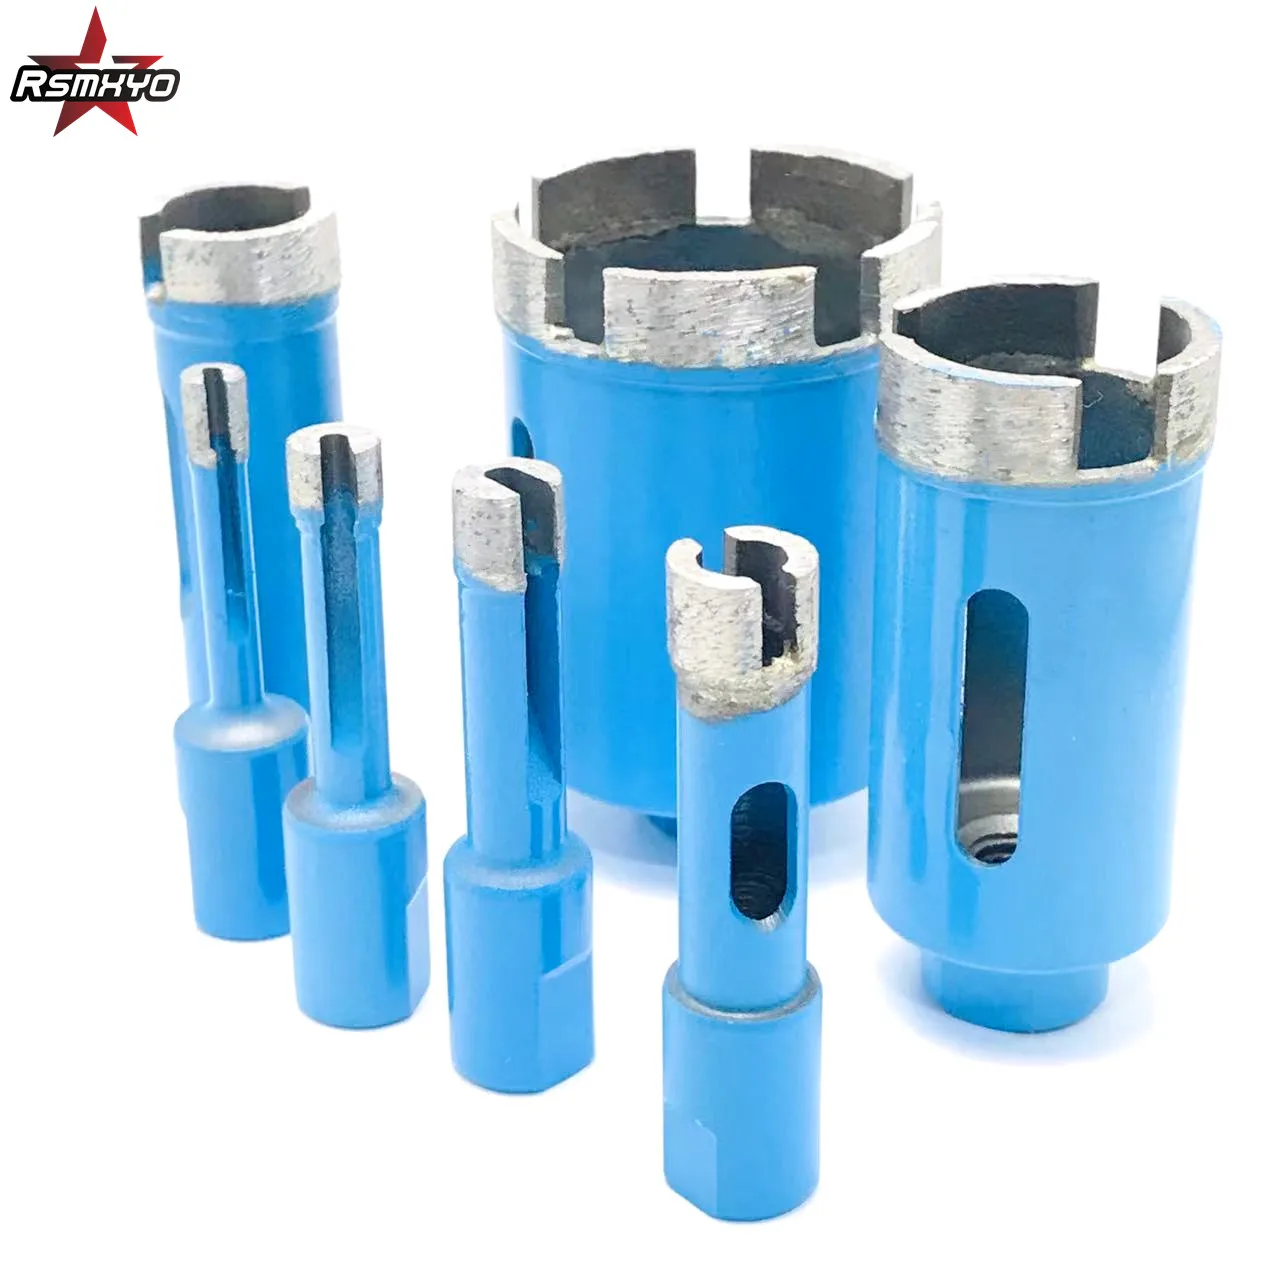 1pcs 6-75mm Diamond Drill Cutter Saw Core Drill Bit M10 Angle Grinder Hole Opener For Marble Granite Brick Tile Ceramic Concrete 1pc 6 120 mm m14 shank hole saw angle grinder diamond core bits marble opener for drilling granite glass ceramic tile concrete